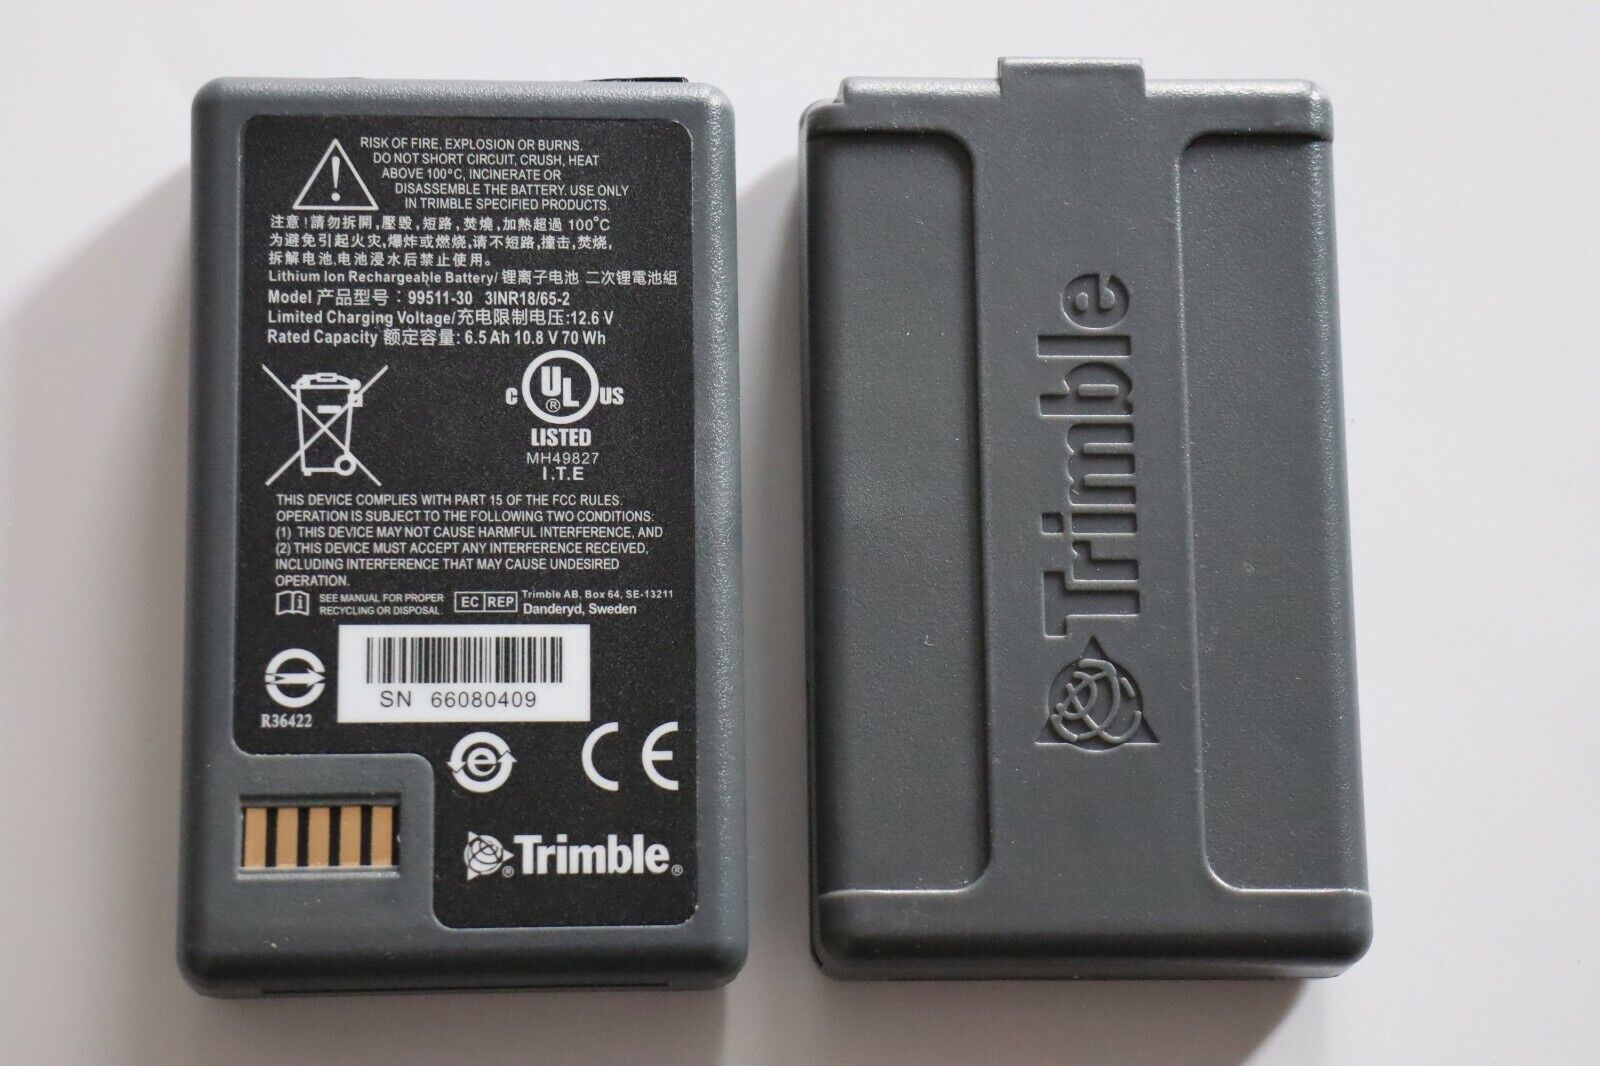 New replace battery for Trimble S3 S6 S8 total station